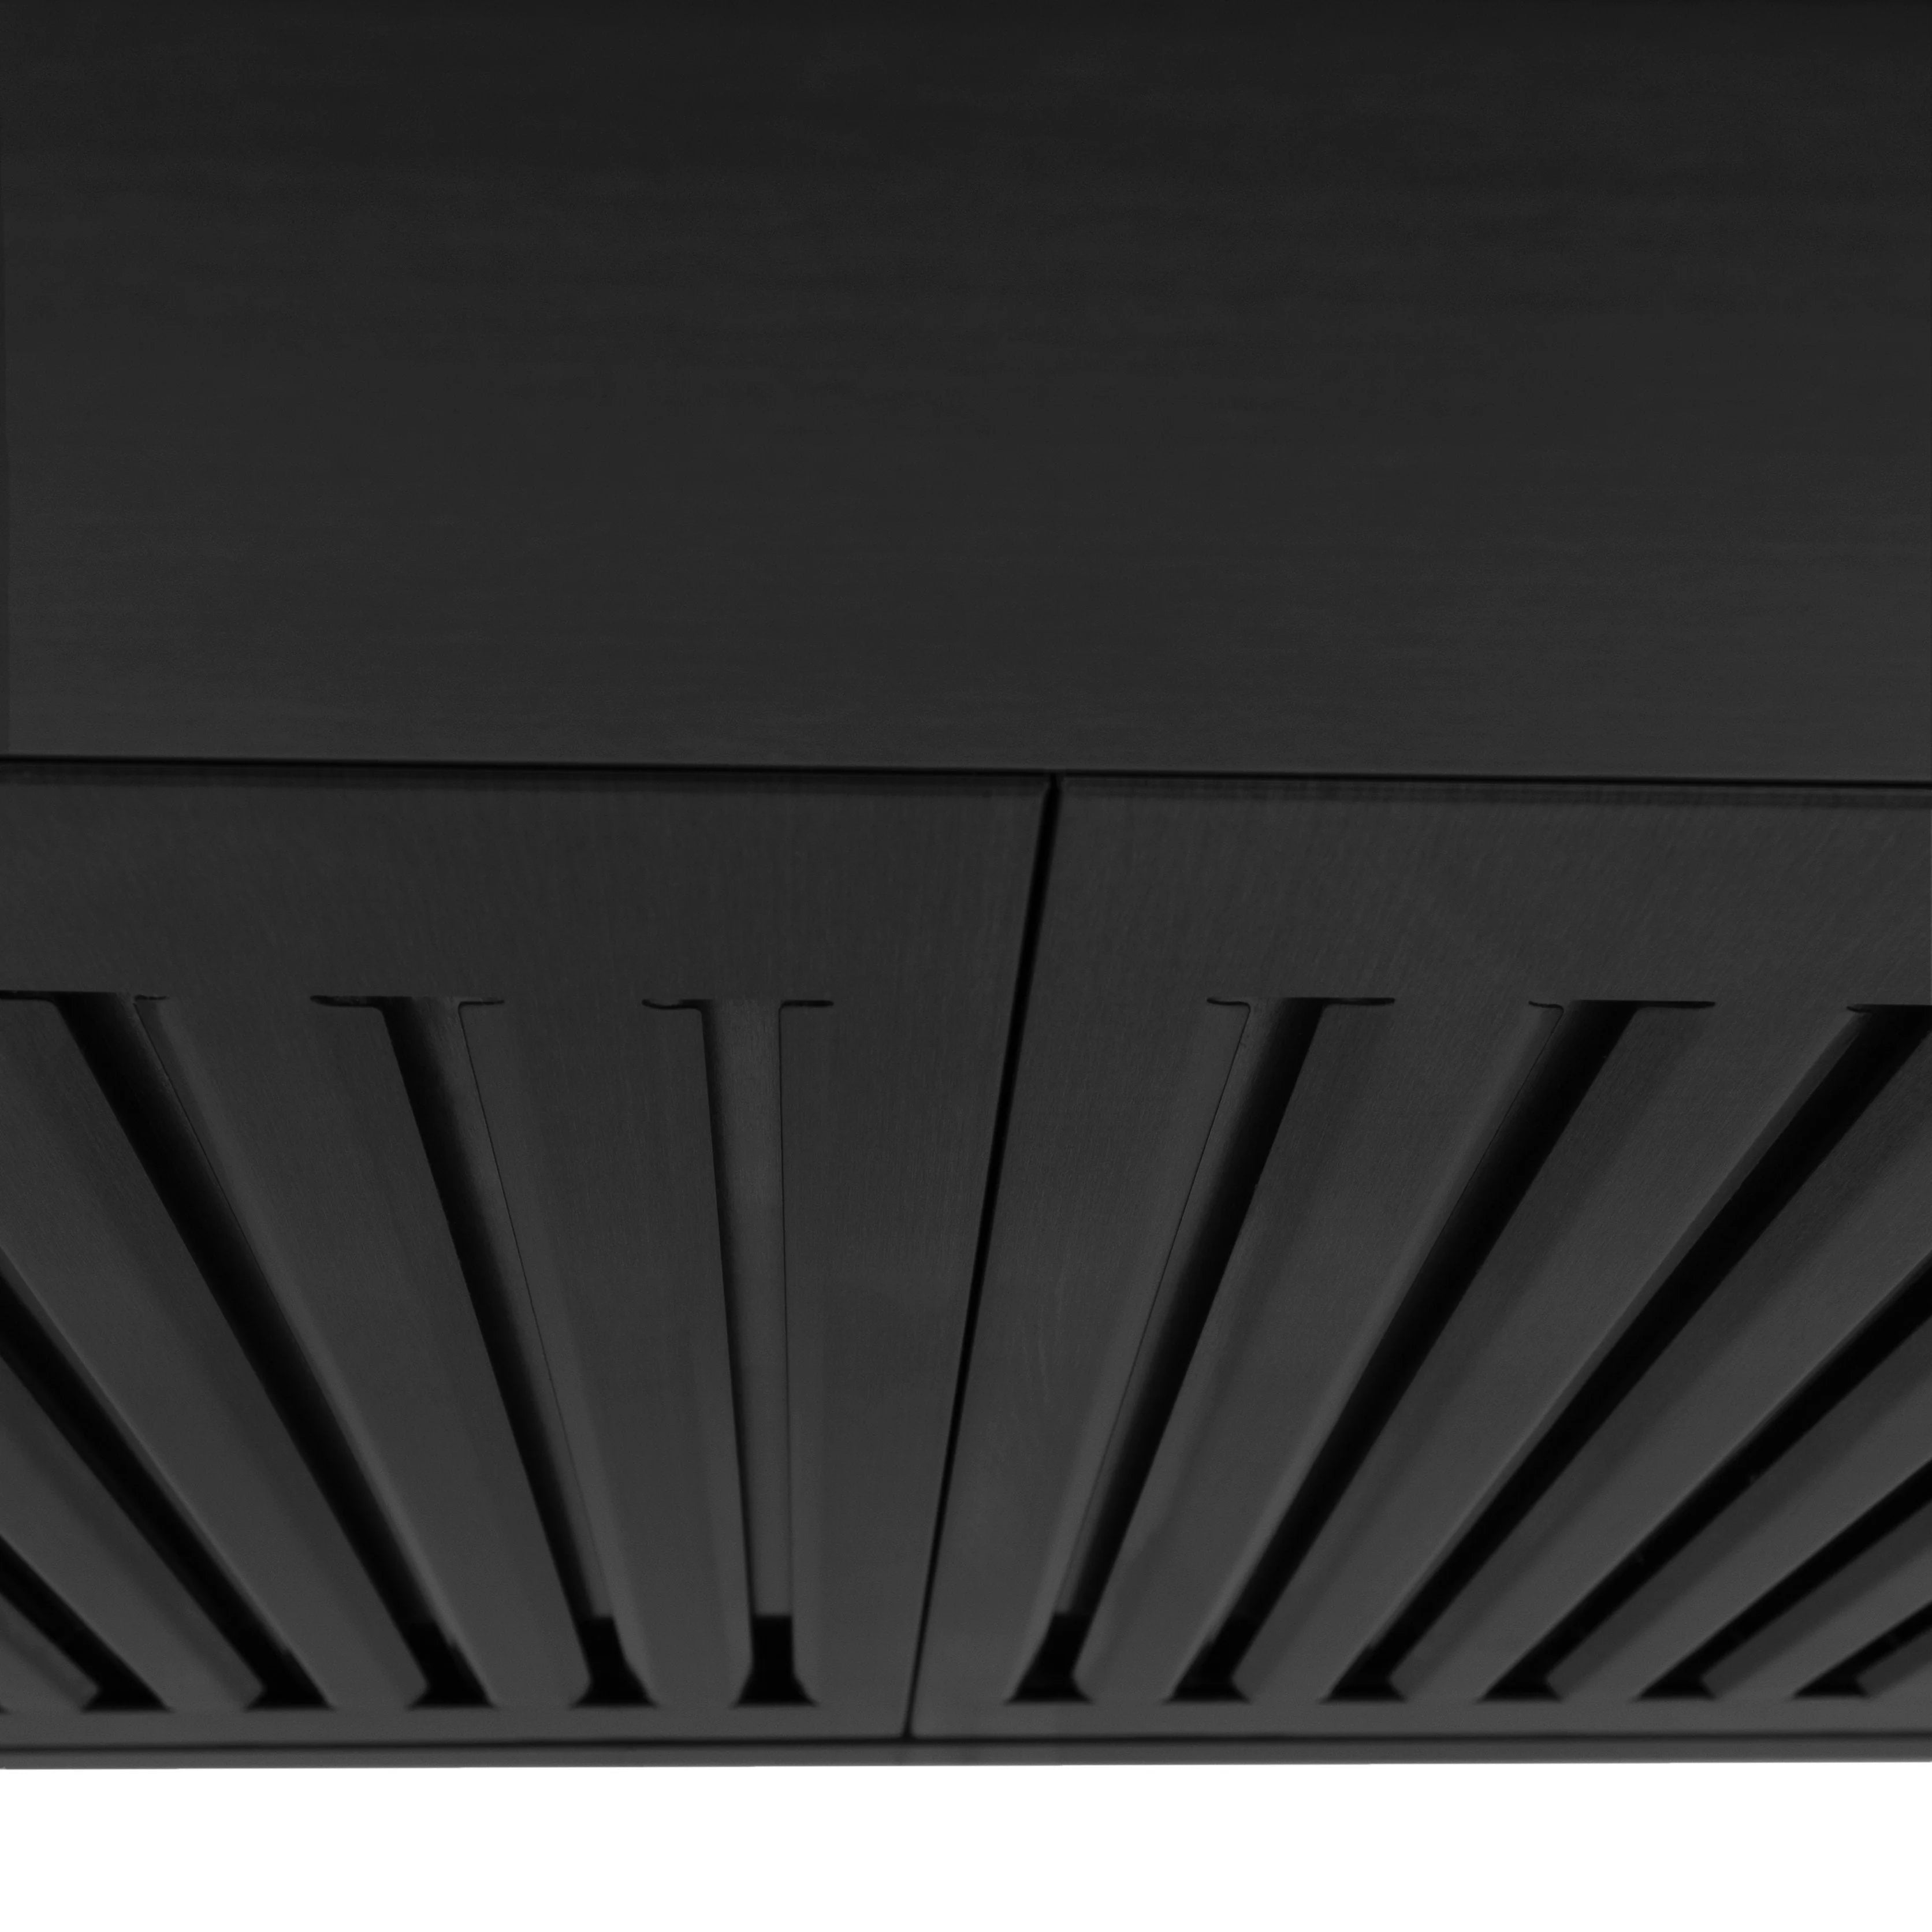 ZLINE 30-Inch Convertible Wall Mount Range Hood in Black Stainless Steel with Set of 2 Charcoal Filters, LED lighting, Baffle Filters - BSKBN-CF-30